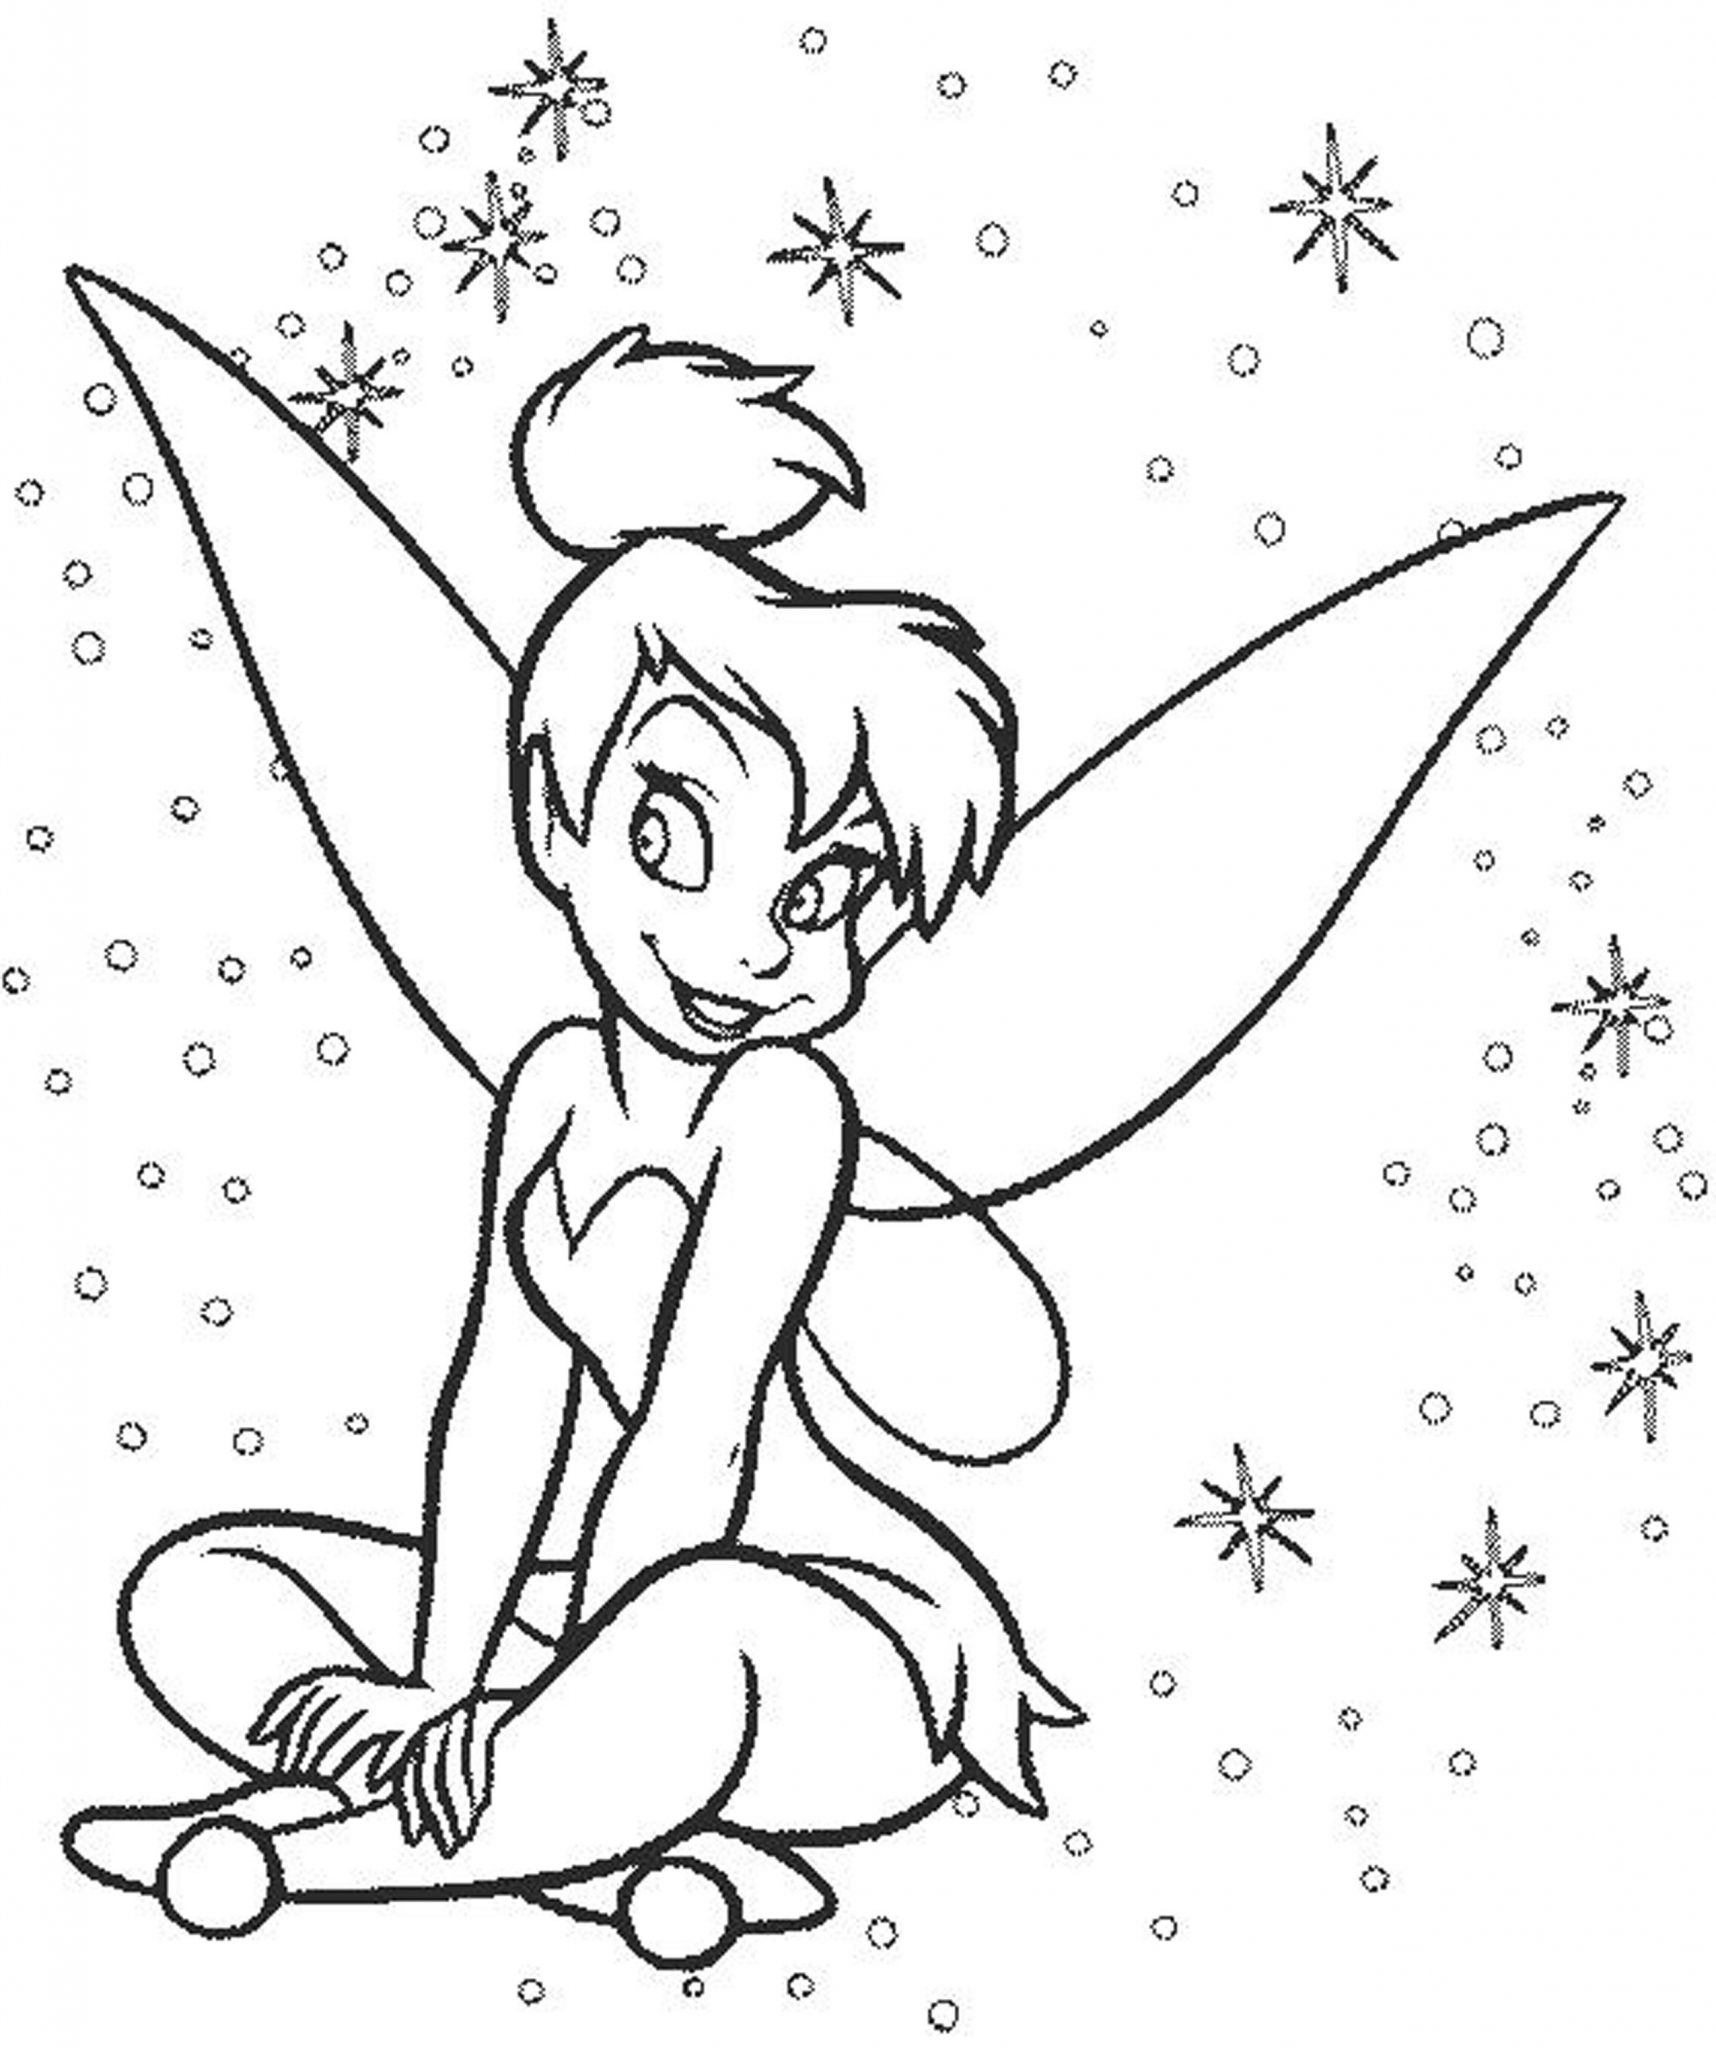 33 Free Disney Coloring Pages for Kids! | BAPS